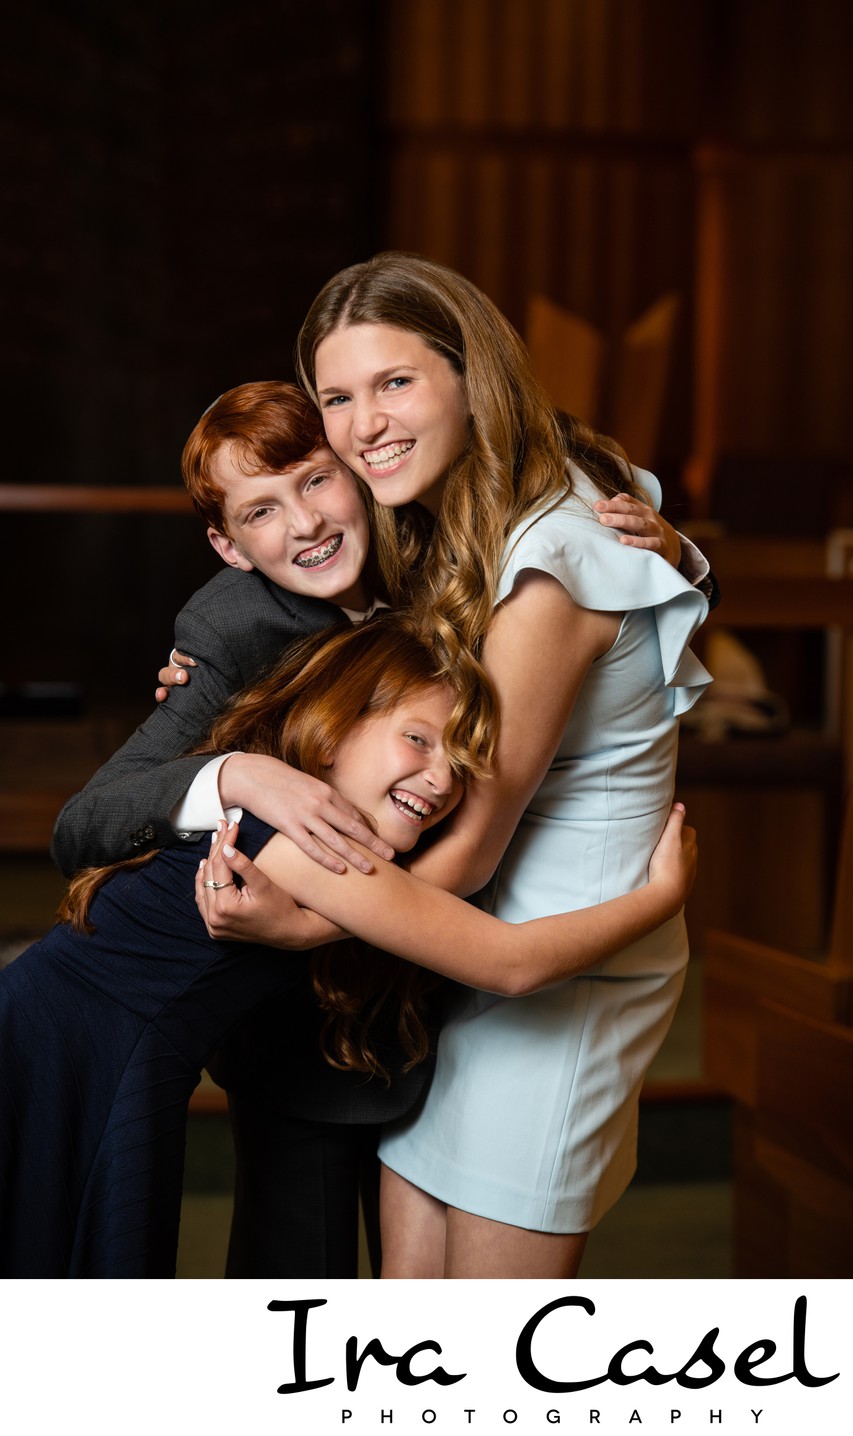 MItzvah Photographer Who Captures Candid Temple Shots